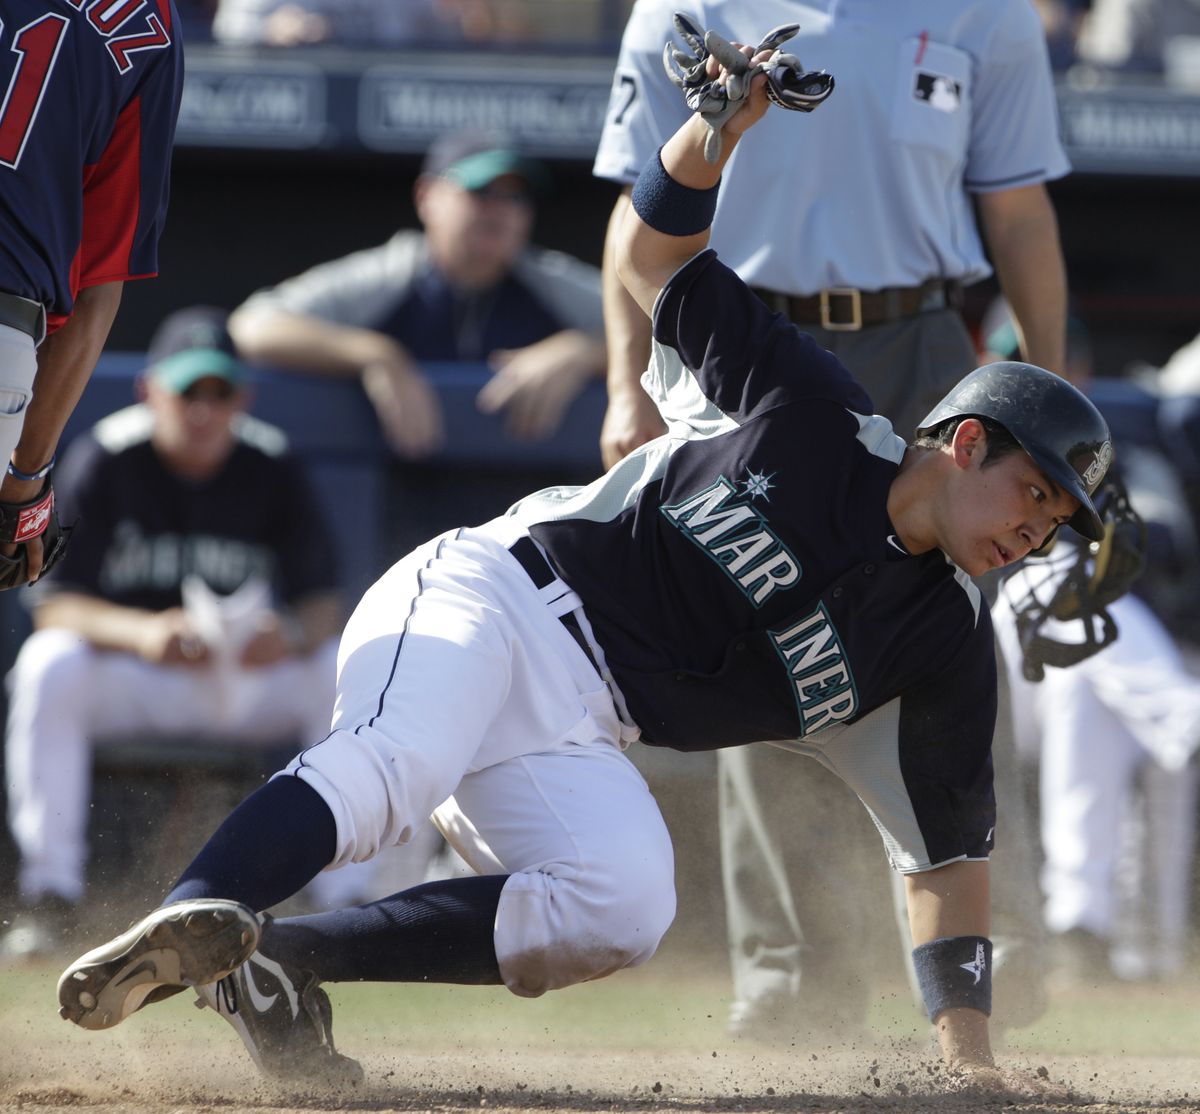 Steven Baron slides in safely while scoring on a wild pitch in Saturday’s game against Cleveland. (Associated Press)